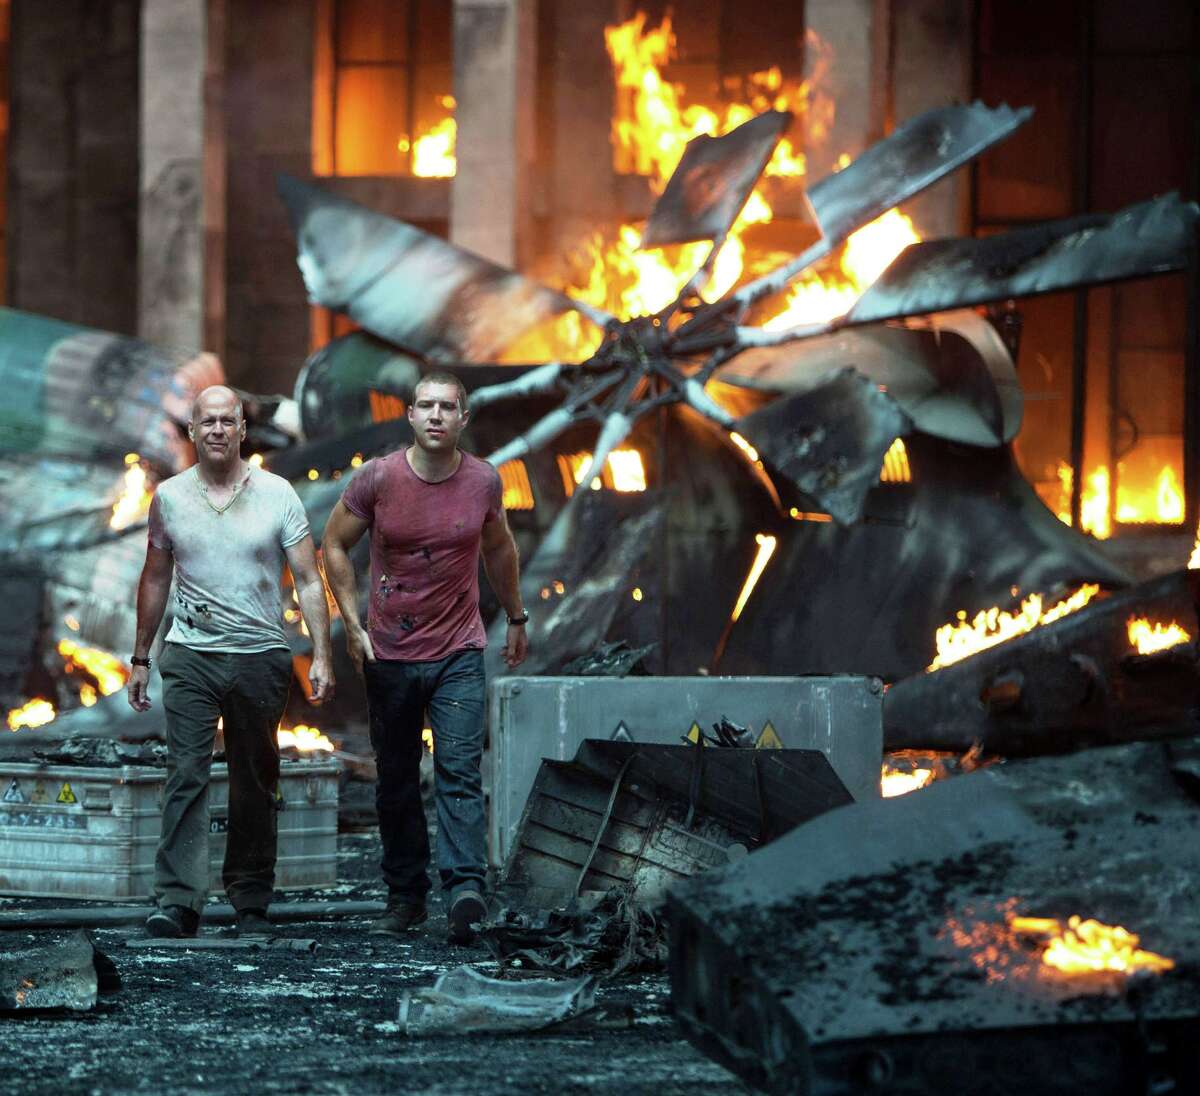 John McClaine (Bruce Willis) and his son Jack (Jai Courtney) survey the wreckage after their encounter with assassins in "A Good Day to Die Hard."